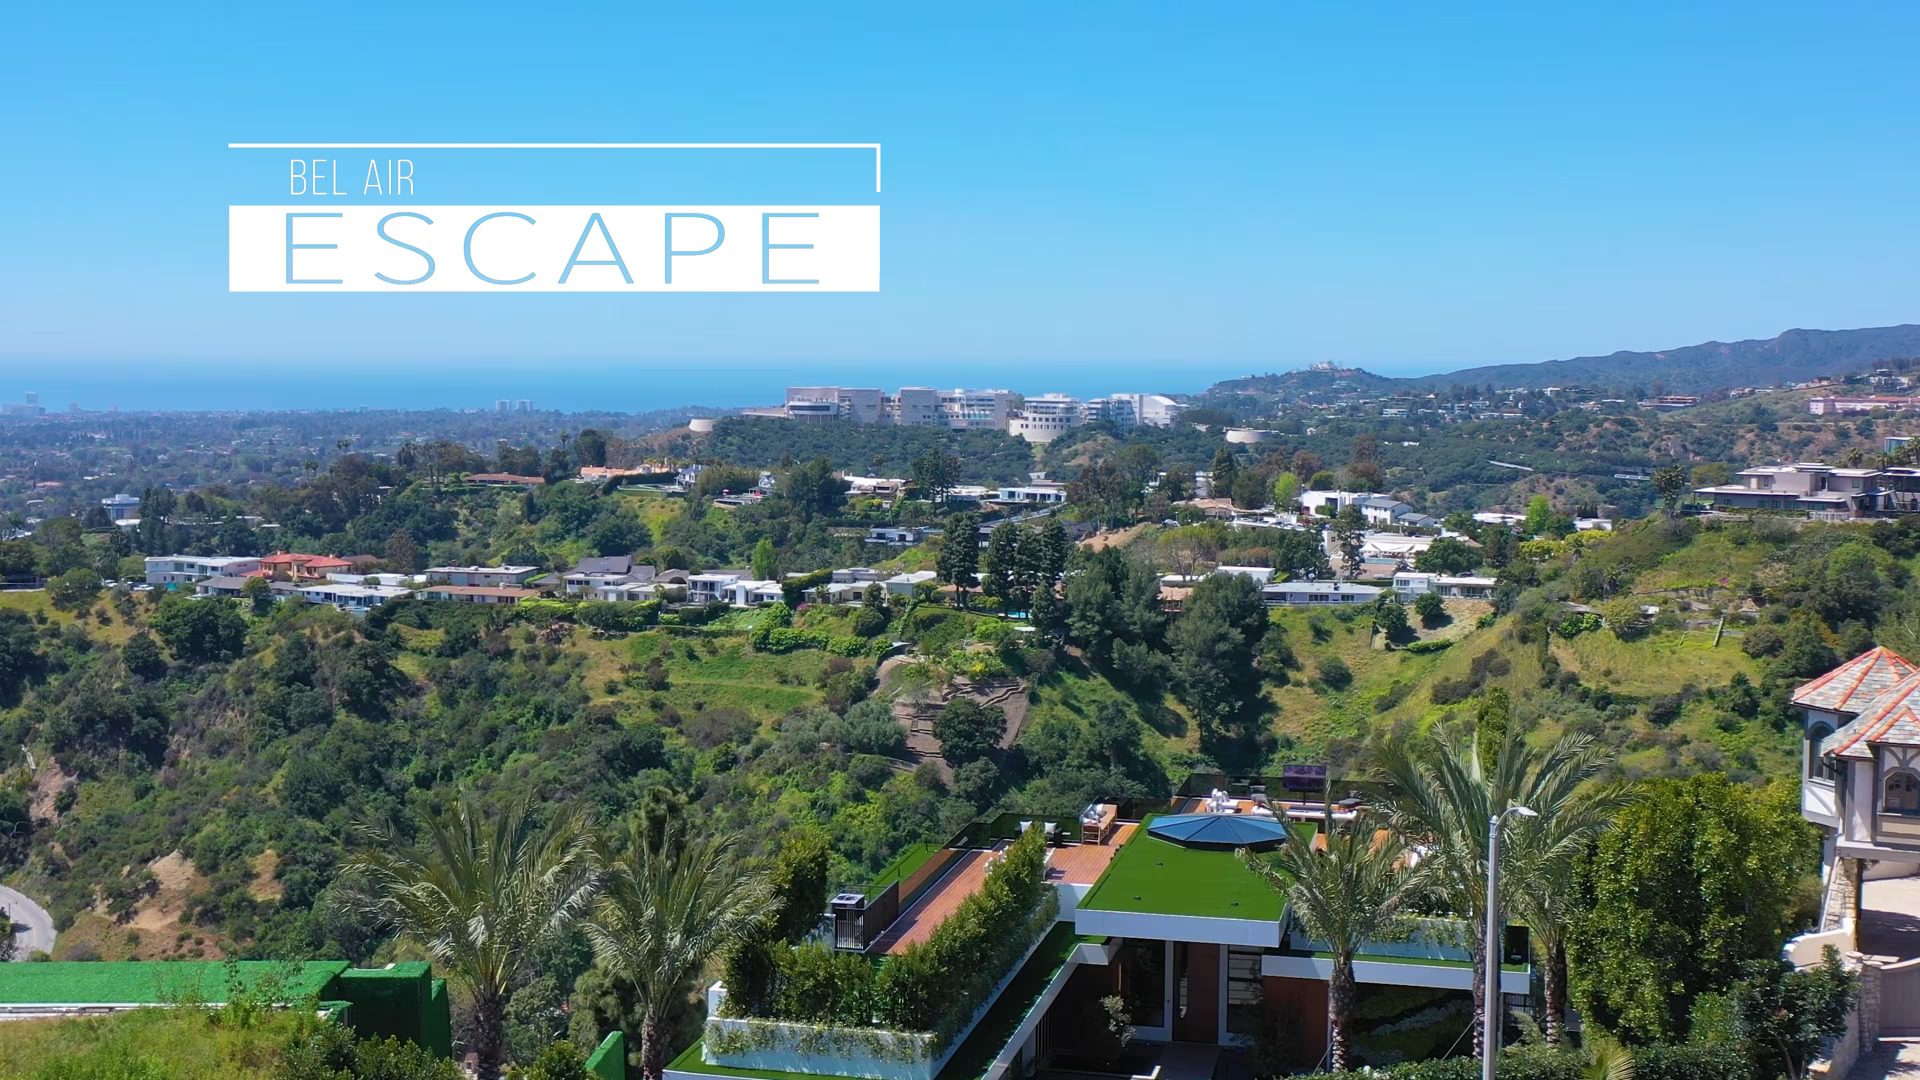 thumbnail for Vimeo video "The Bel Air Escape"